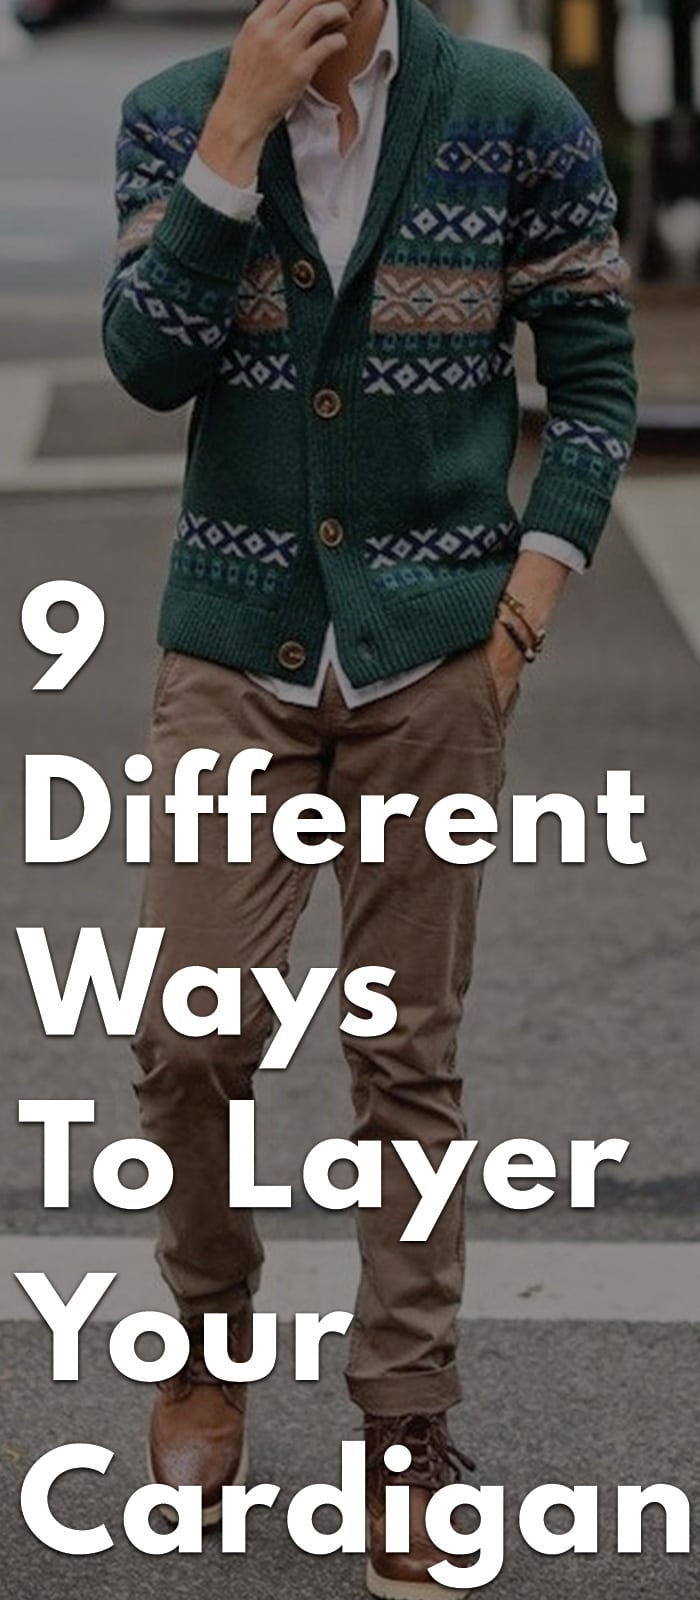 9-Different-Ways-To-Layer-Your-Cardigan